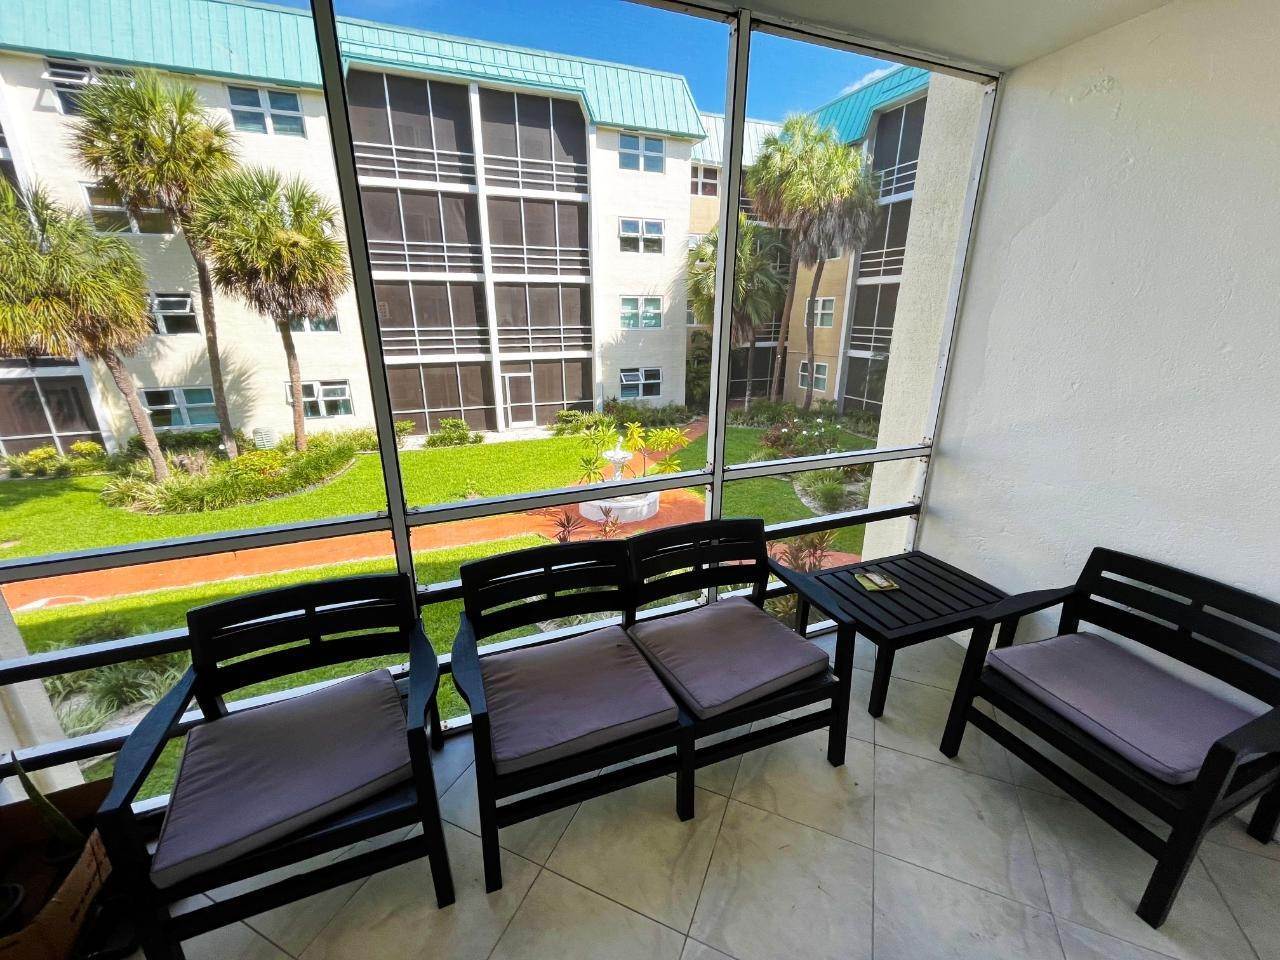 13. Condo for Sale at Other Bahamas, Other Areas In The Bahamas Bahamas